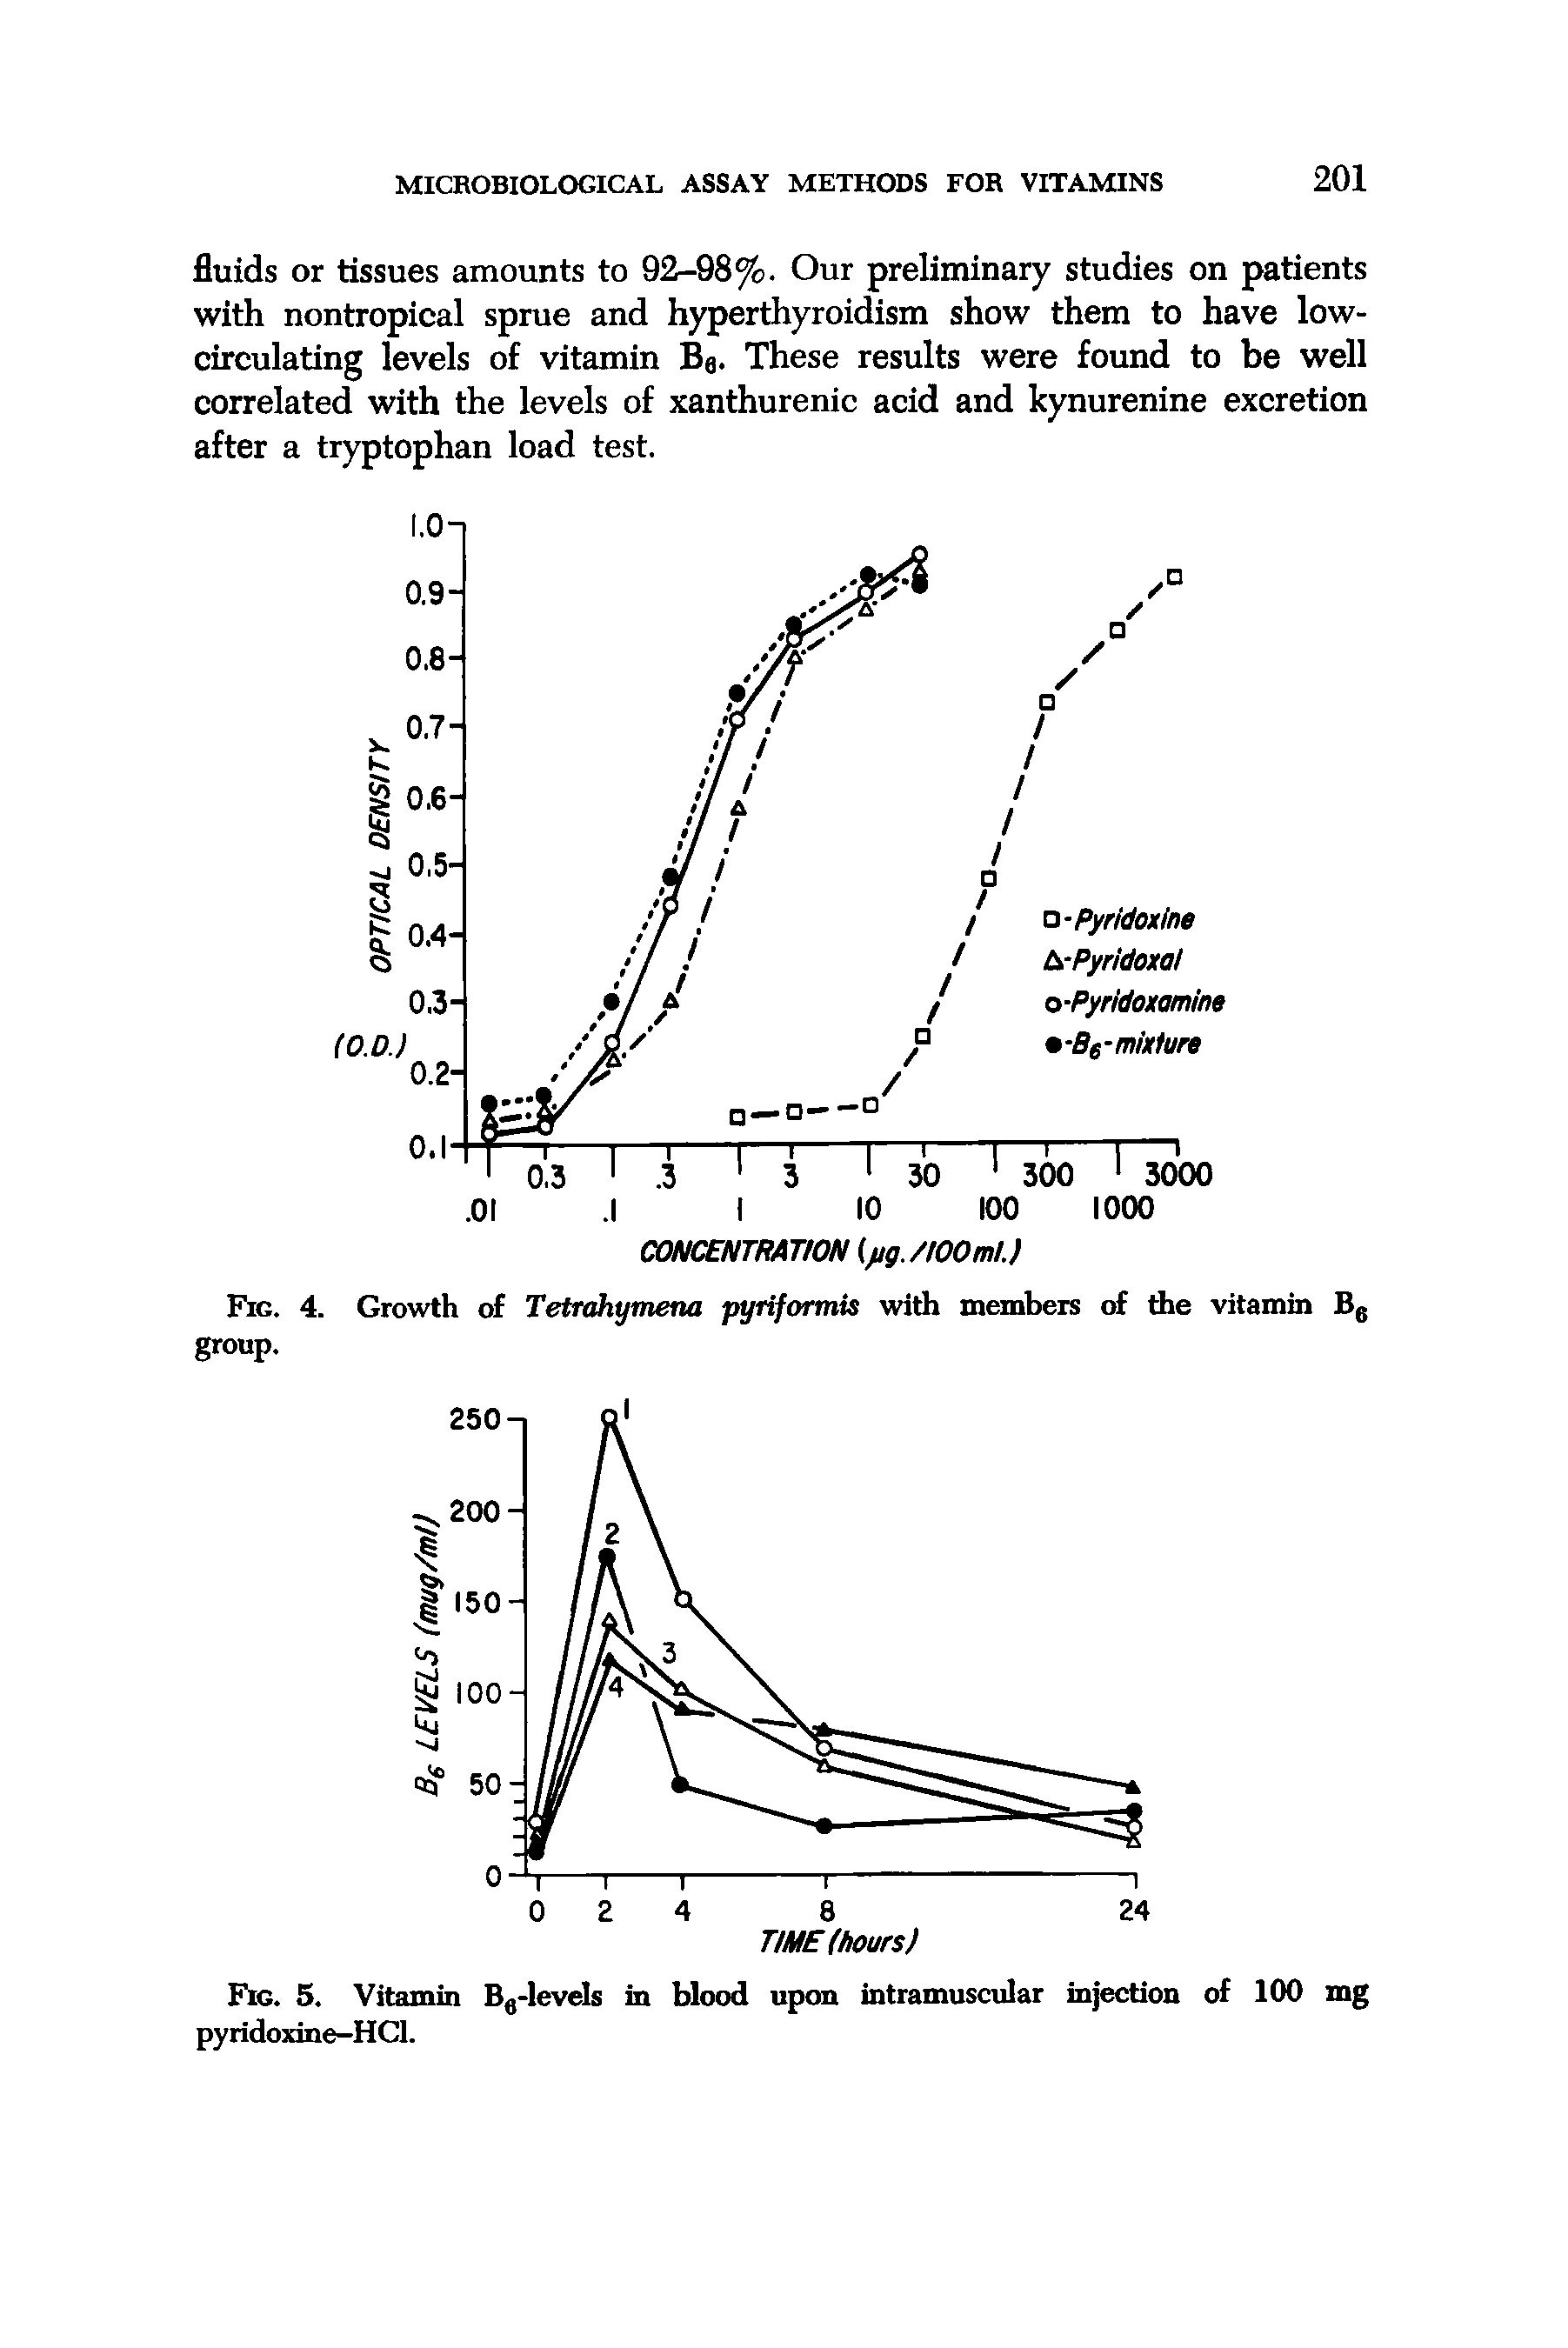 Fig. 5. Vitamin Ba-levels in blood upon intramuscular injection of 100 mg pyridoxine-HCl.